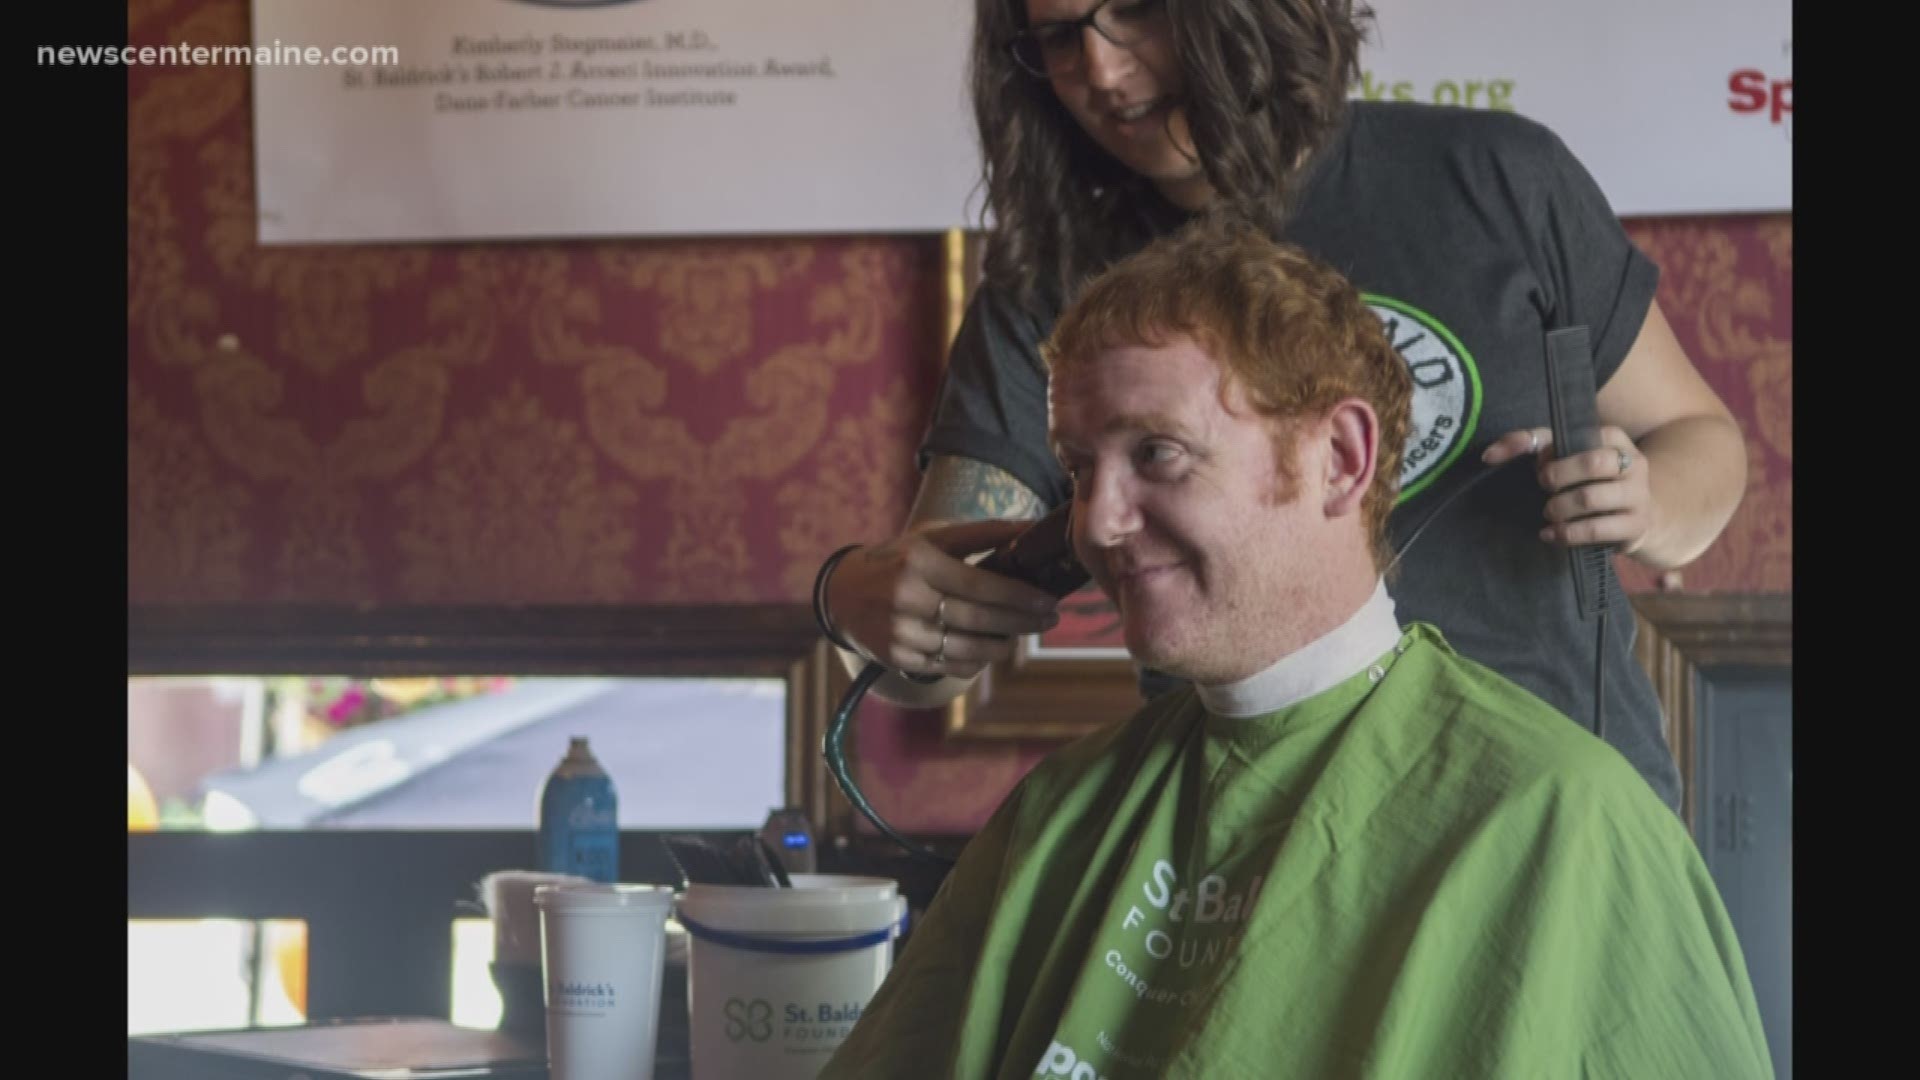 Firefighters shaved their heads to raise money for St. Baldricks. Peggy Keyser was their making imagery.